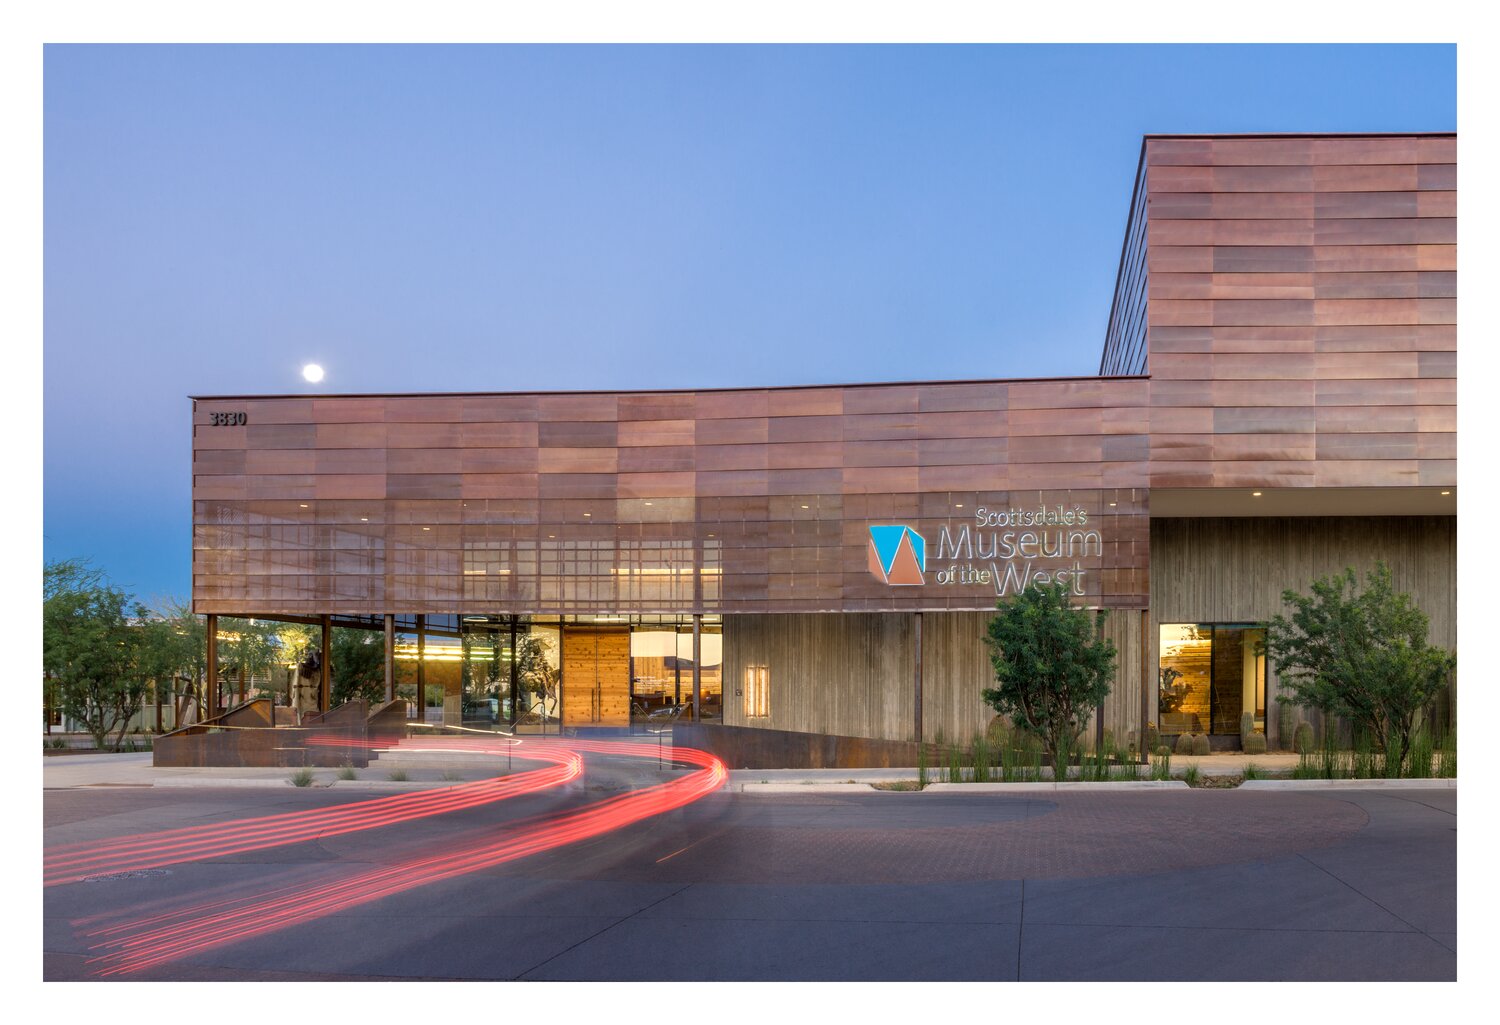 Western Spirit: Scottsdale’s Museum of the West is dedicated to preserving the rich history and cultural heritage of the greater American West.